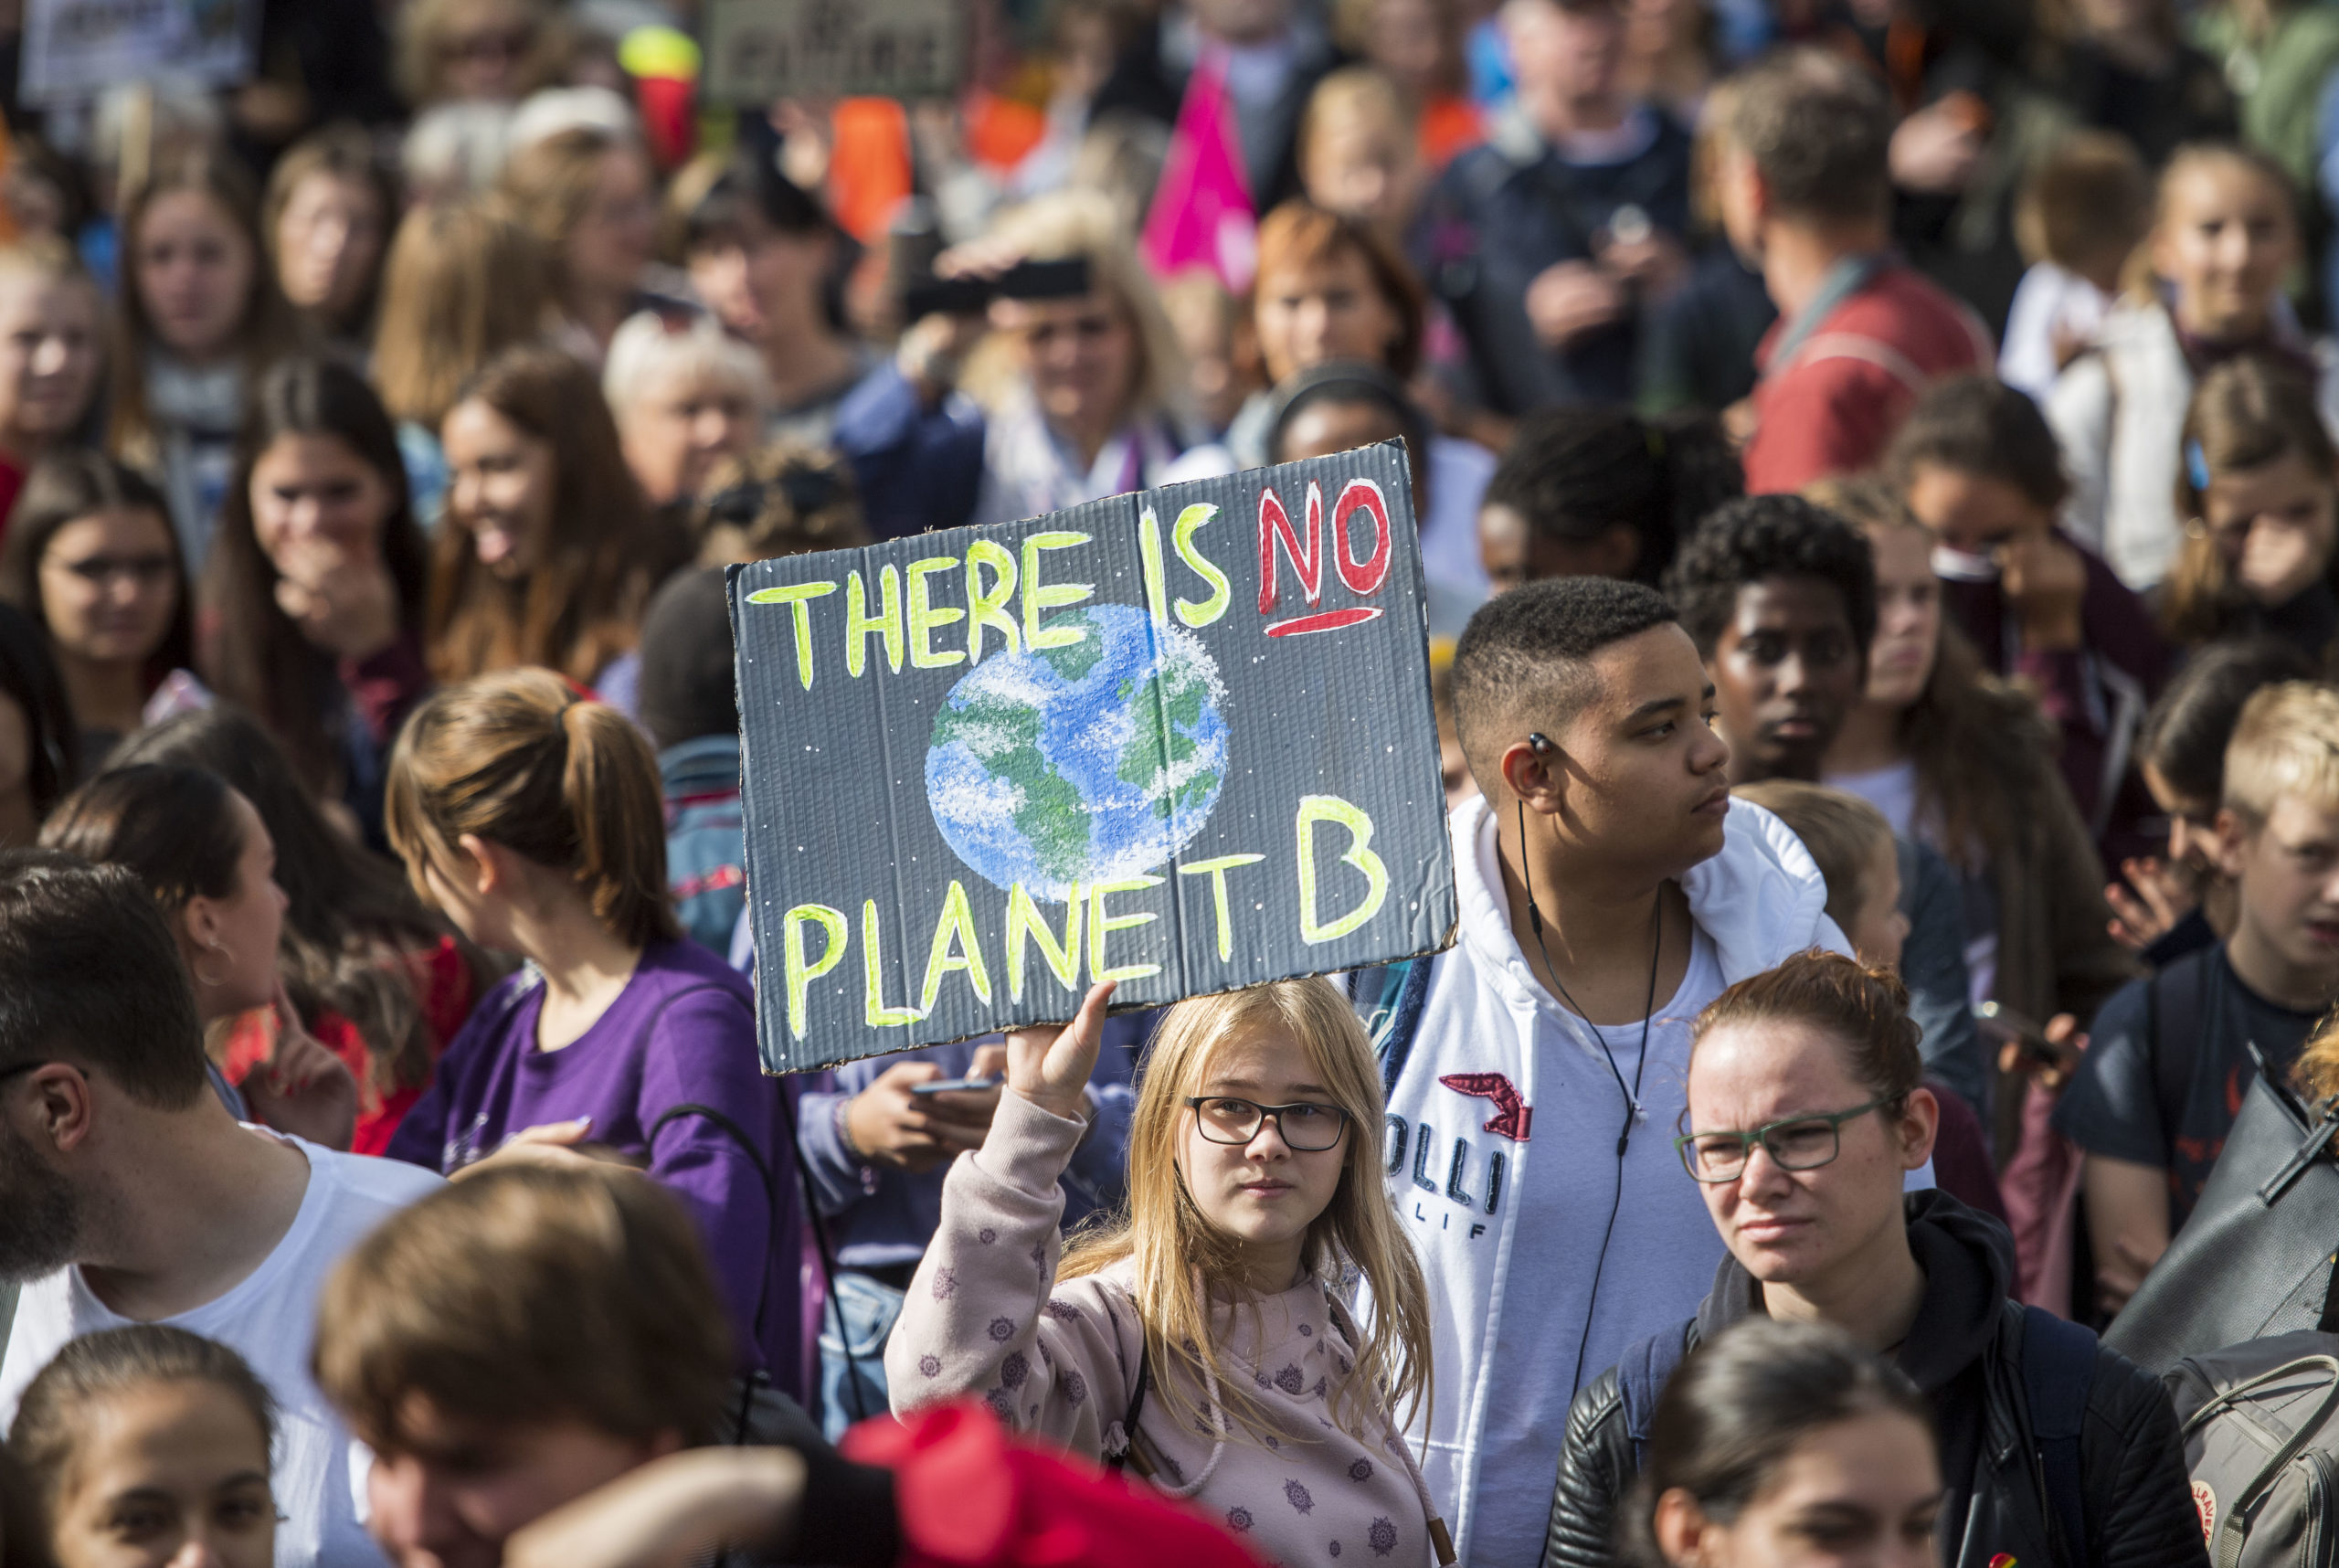 Activists protest during a nationwide climate change action day on Sept. 20, 2019 in Frankfurt, Germany. (Thomas Lohnes/Getty Images)